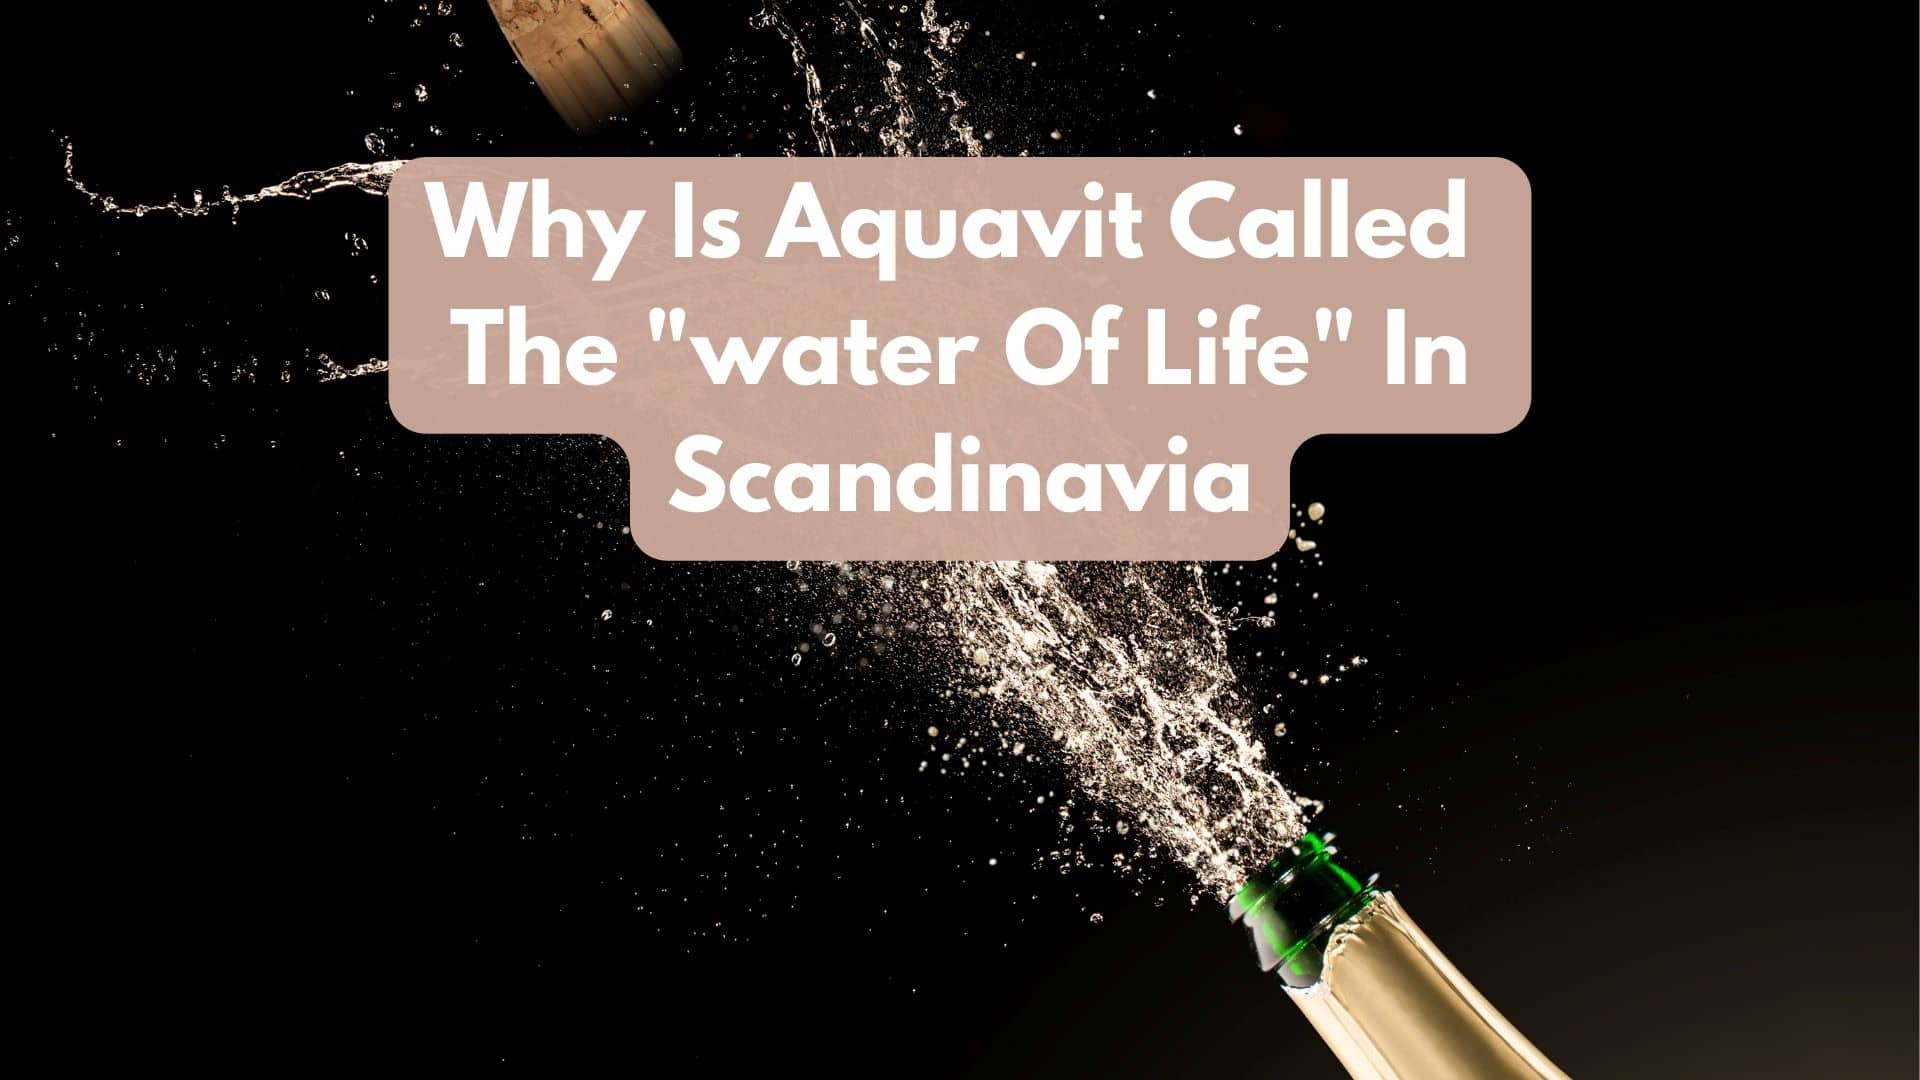 Why Is Aquavit Called The “water Of Life” In Scandinavia?